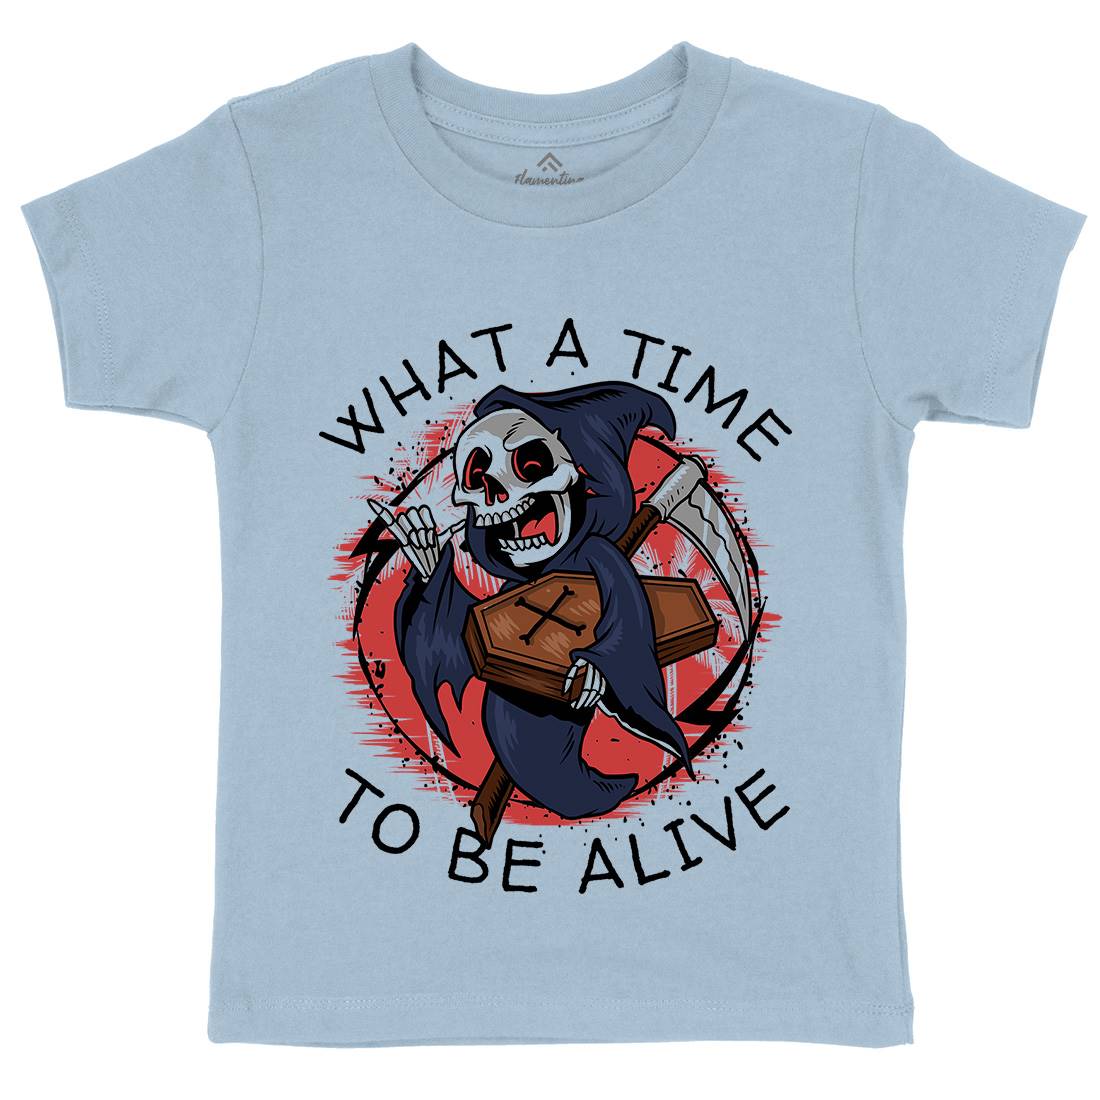 What A Time To Be Alive Kids Crew Neck T-Shirt Funny D096